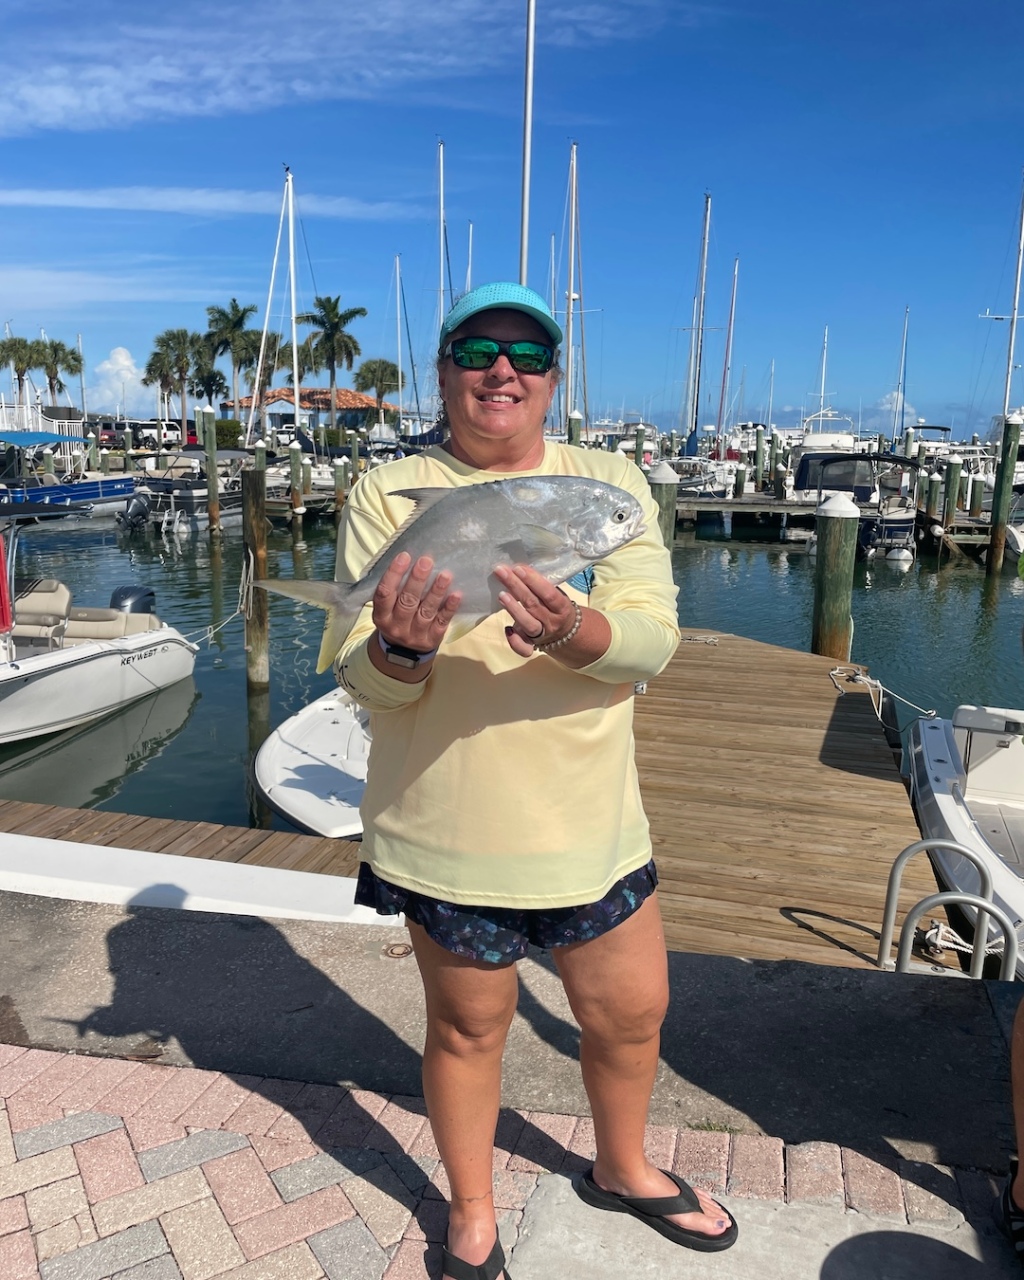 Tight Lines and Sea Breezes: A Fishing Adventure With Tania!